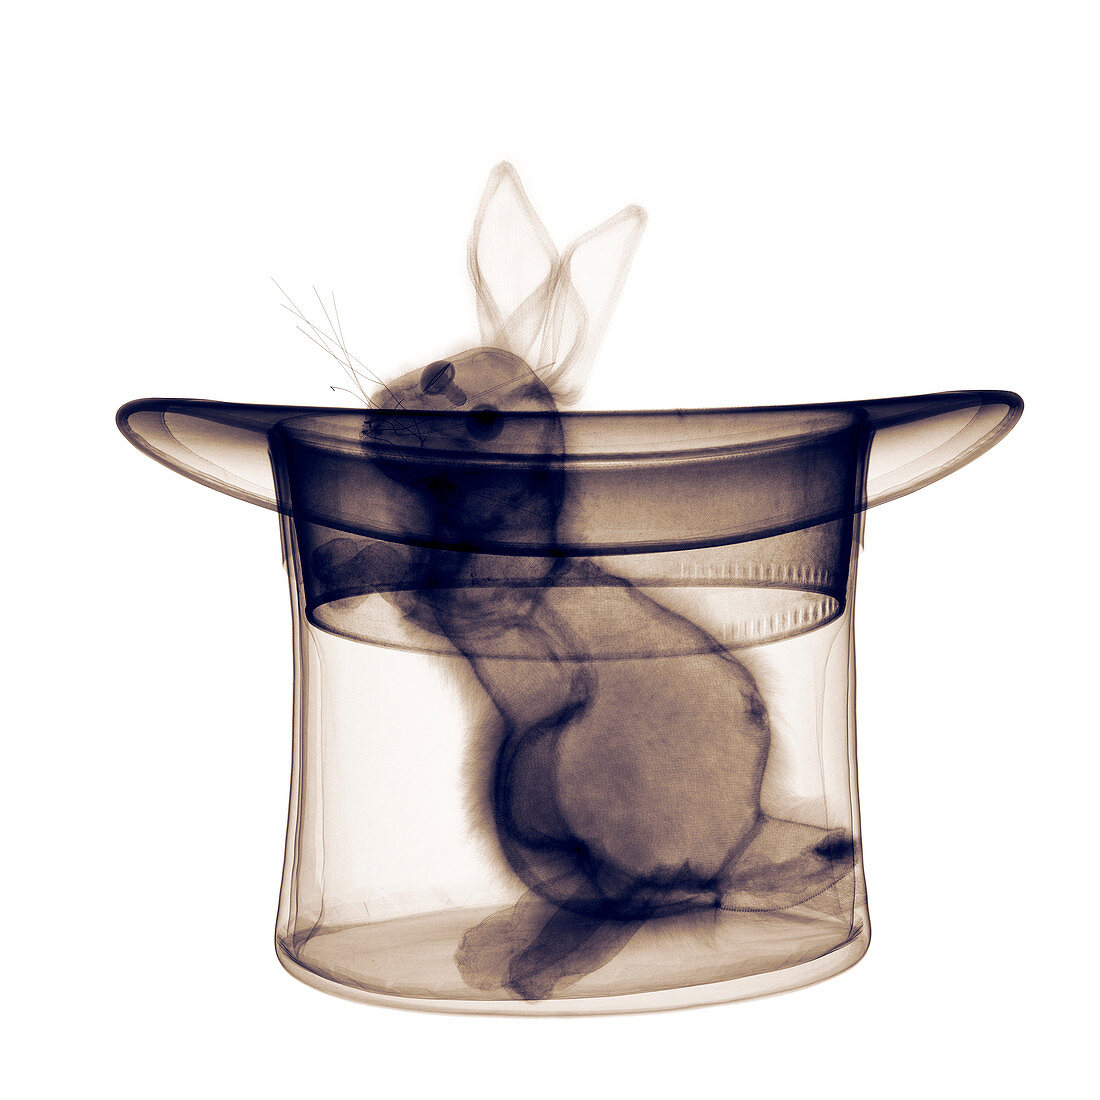 Rabbit in a hat,X-ray